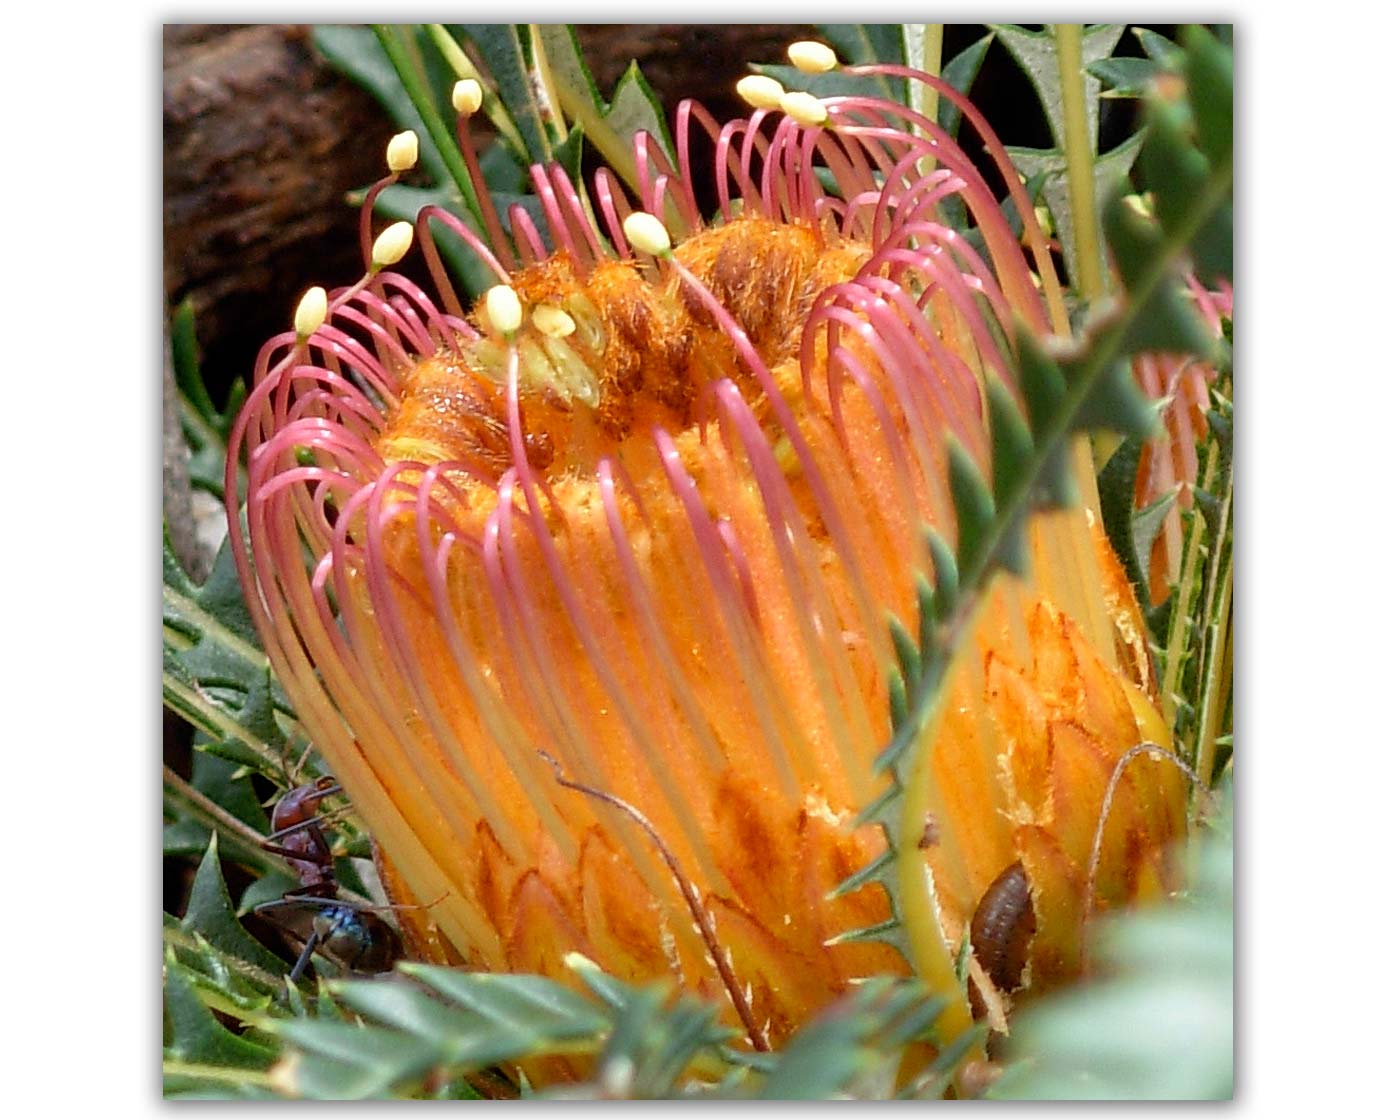 The flowers of Banksia nivea have a hole in the middle thought to protect small mammals and birds as they feed - photo JarrahTree